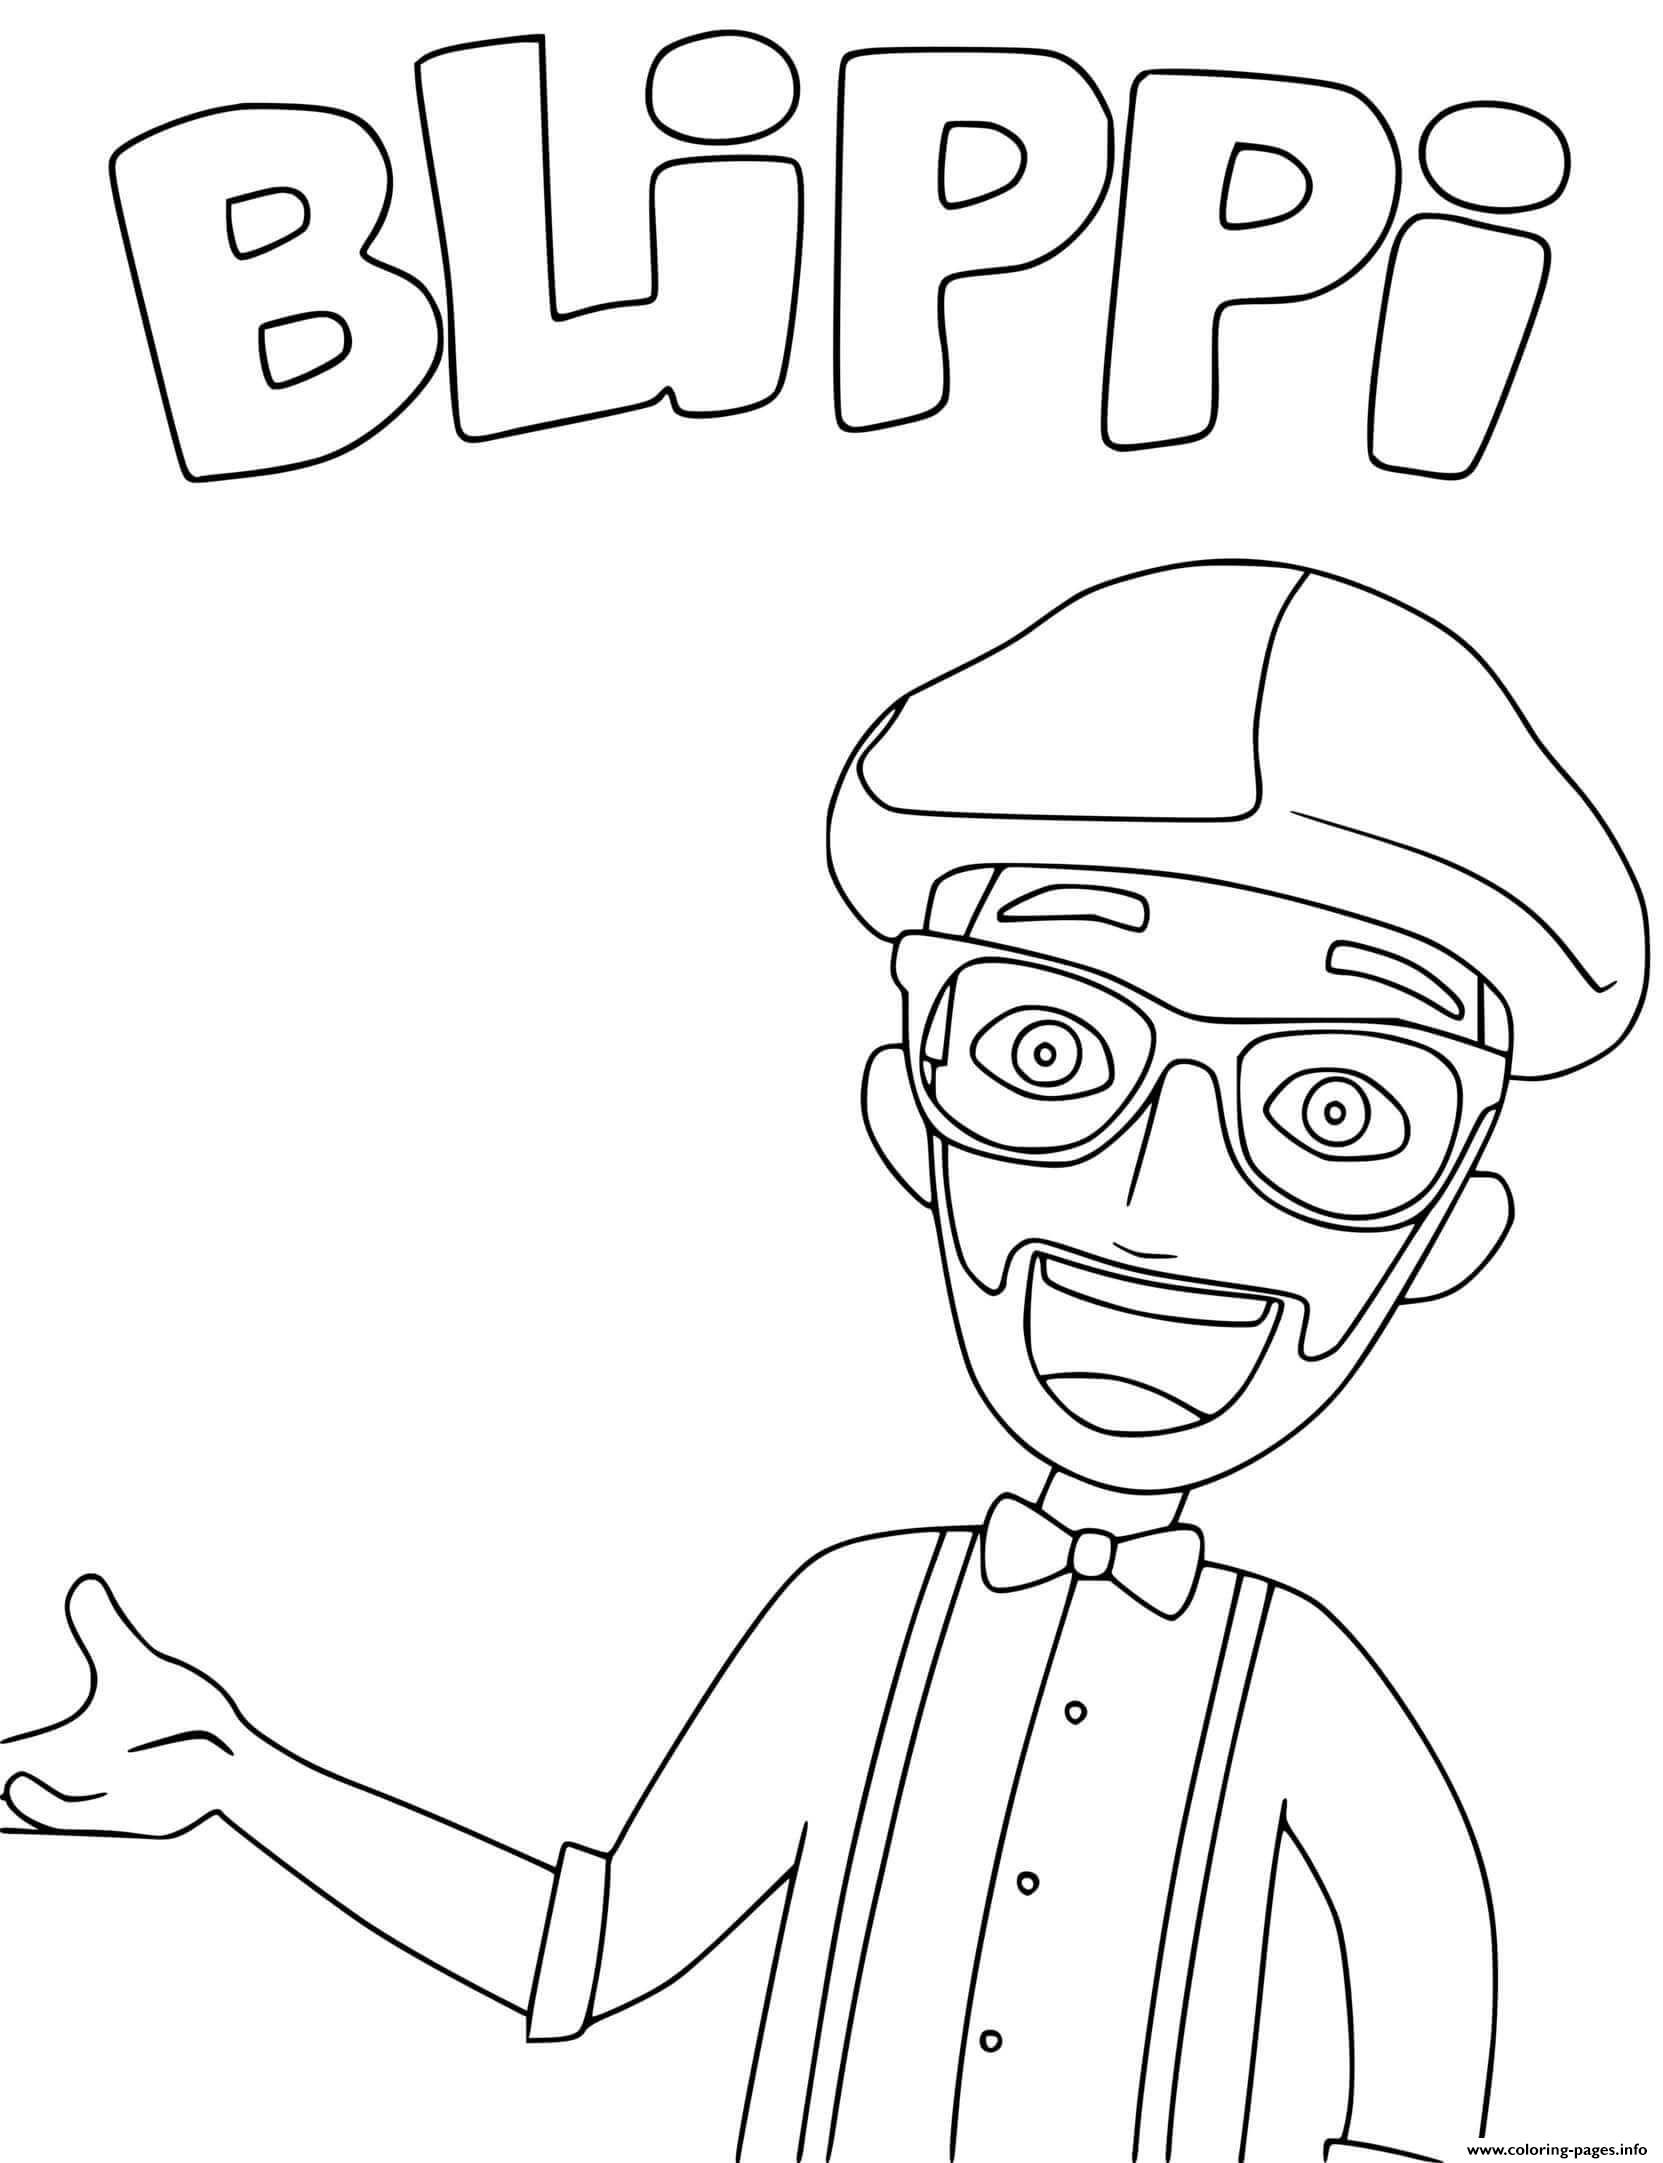 Blippi Pages Printable Coloring Pages